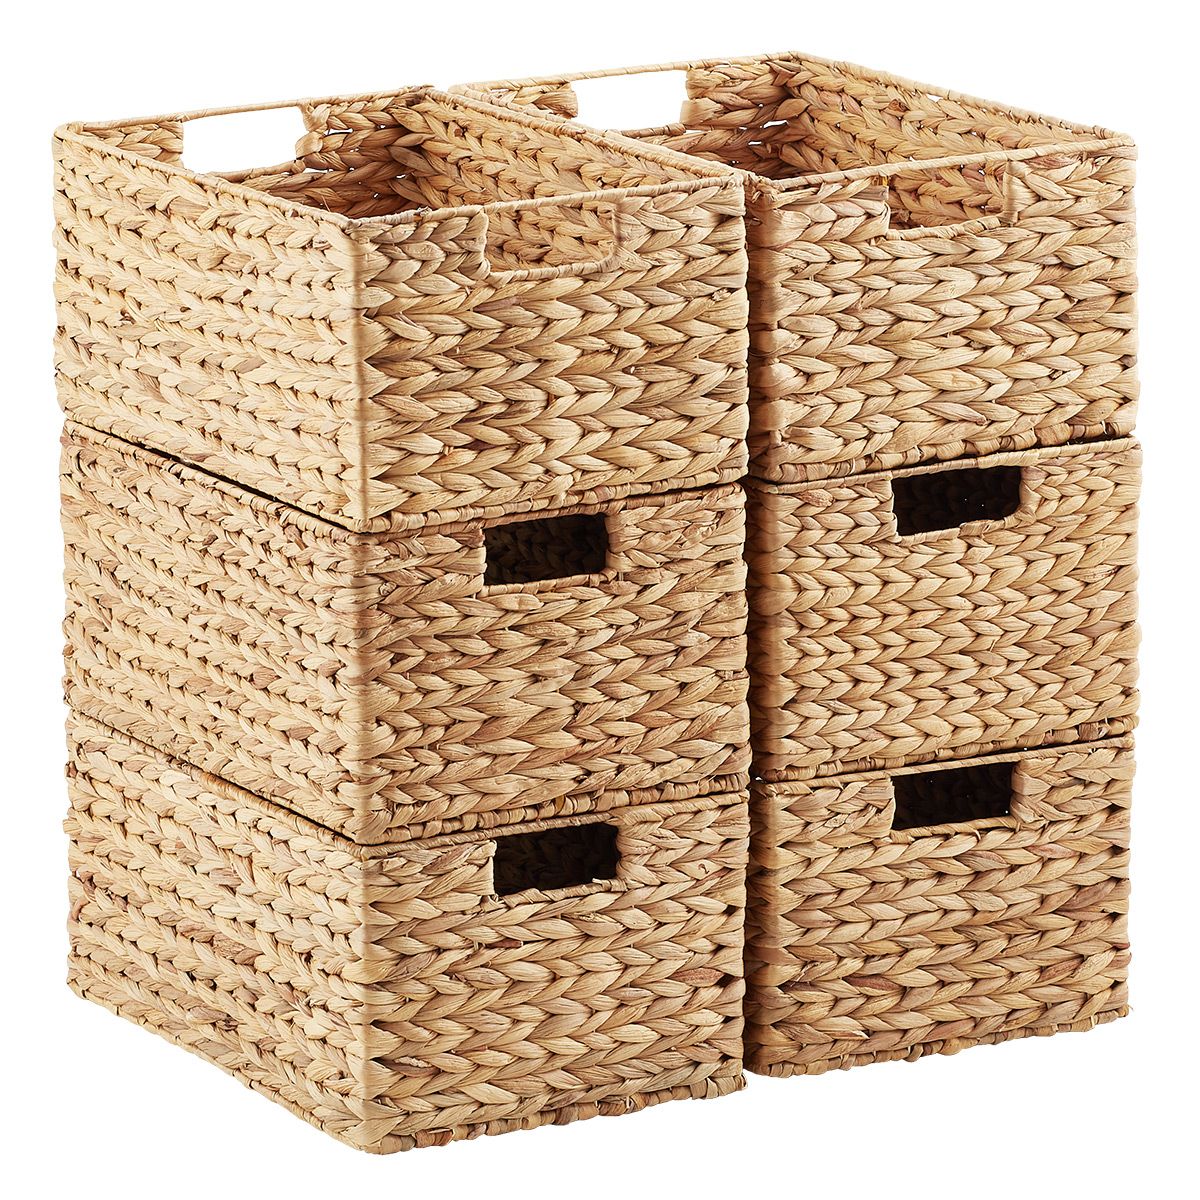 Cases of Water Hyacinth Storage Bins with Handles | The Container Store